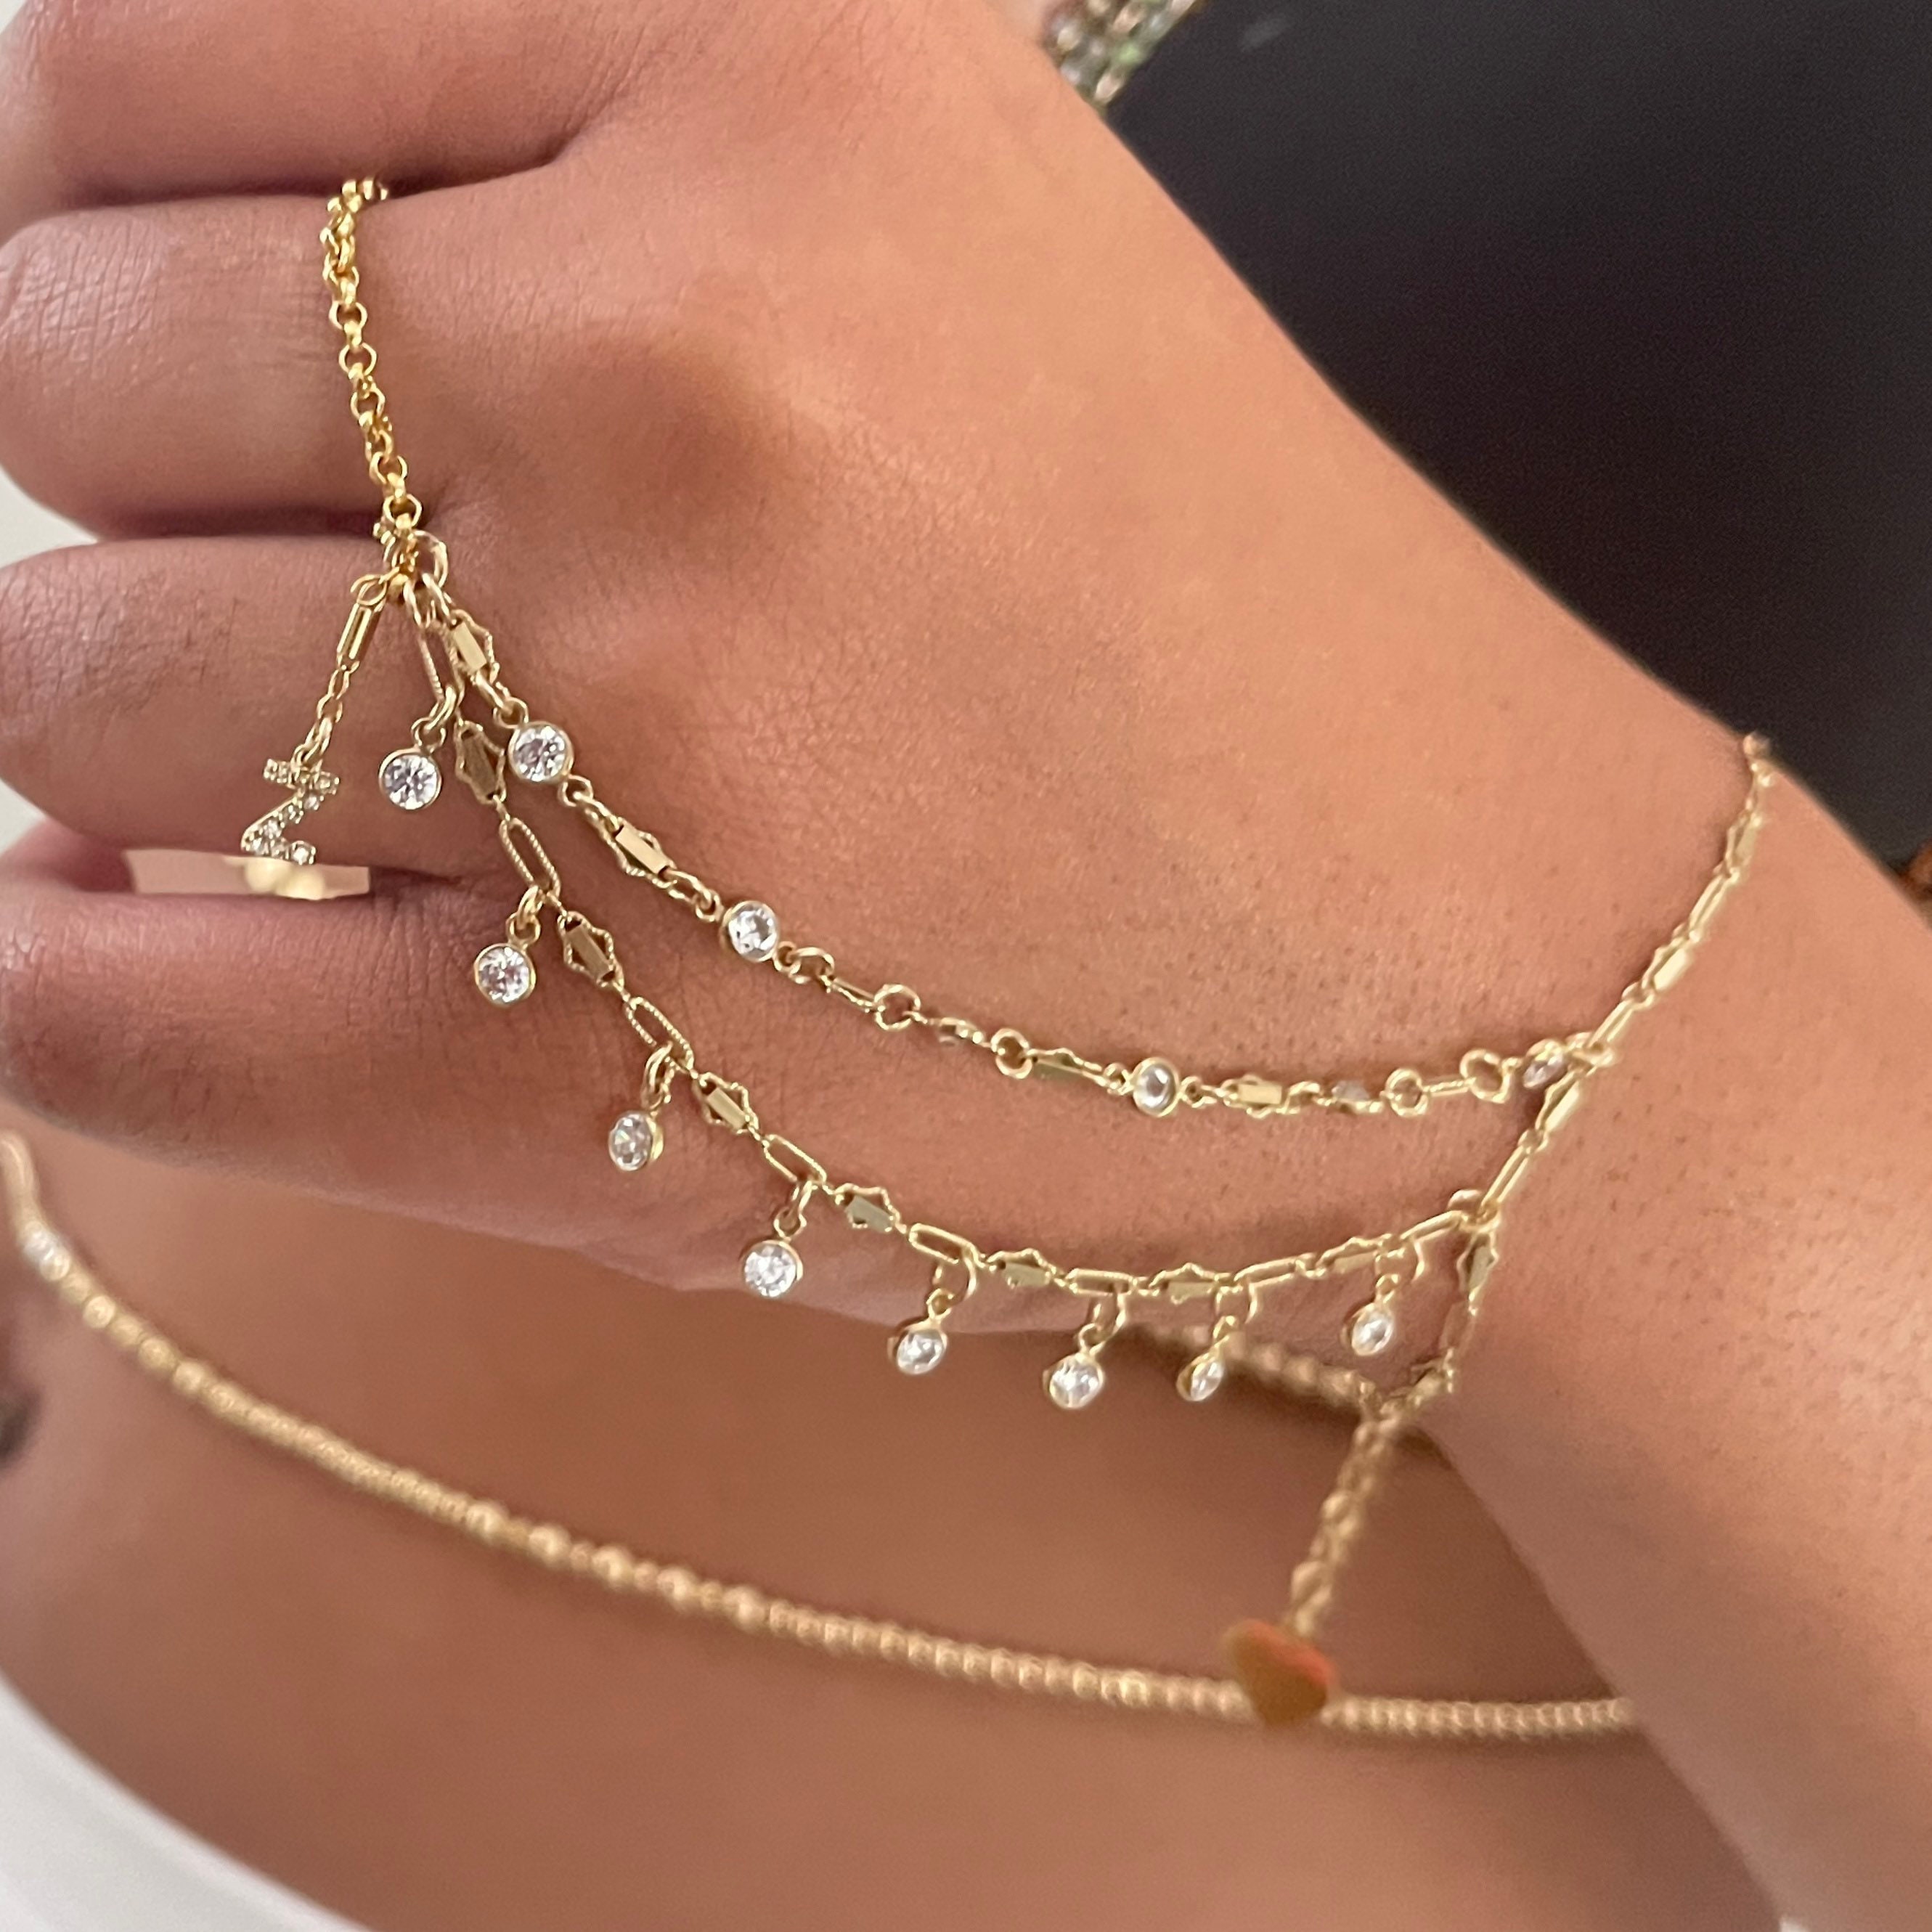 Buy Proplady Bling Combo (Set of 2) Designer Golden Zircons Stud Ring  Bracelet, Hath Phool, Hand Harness, Hand Chain for girls & women|Wedding  Jewelry at Amazon.in